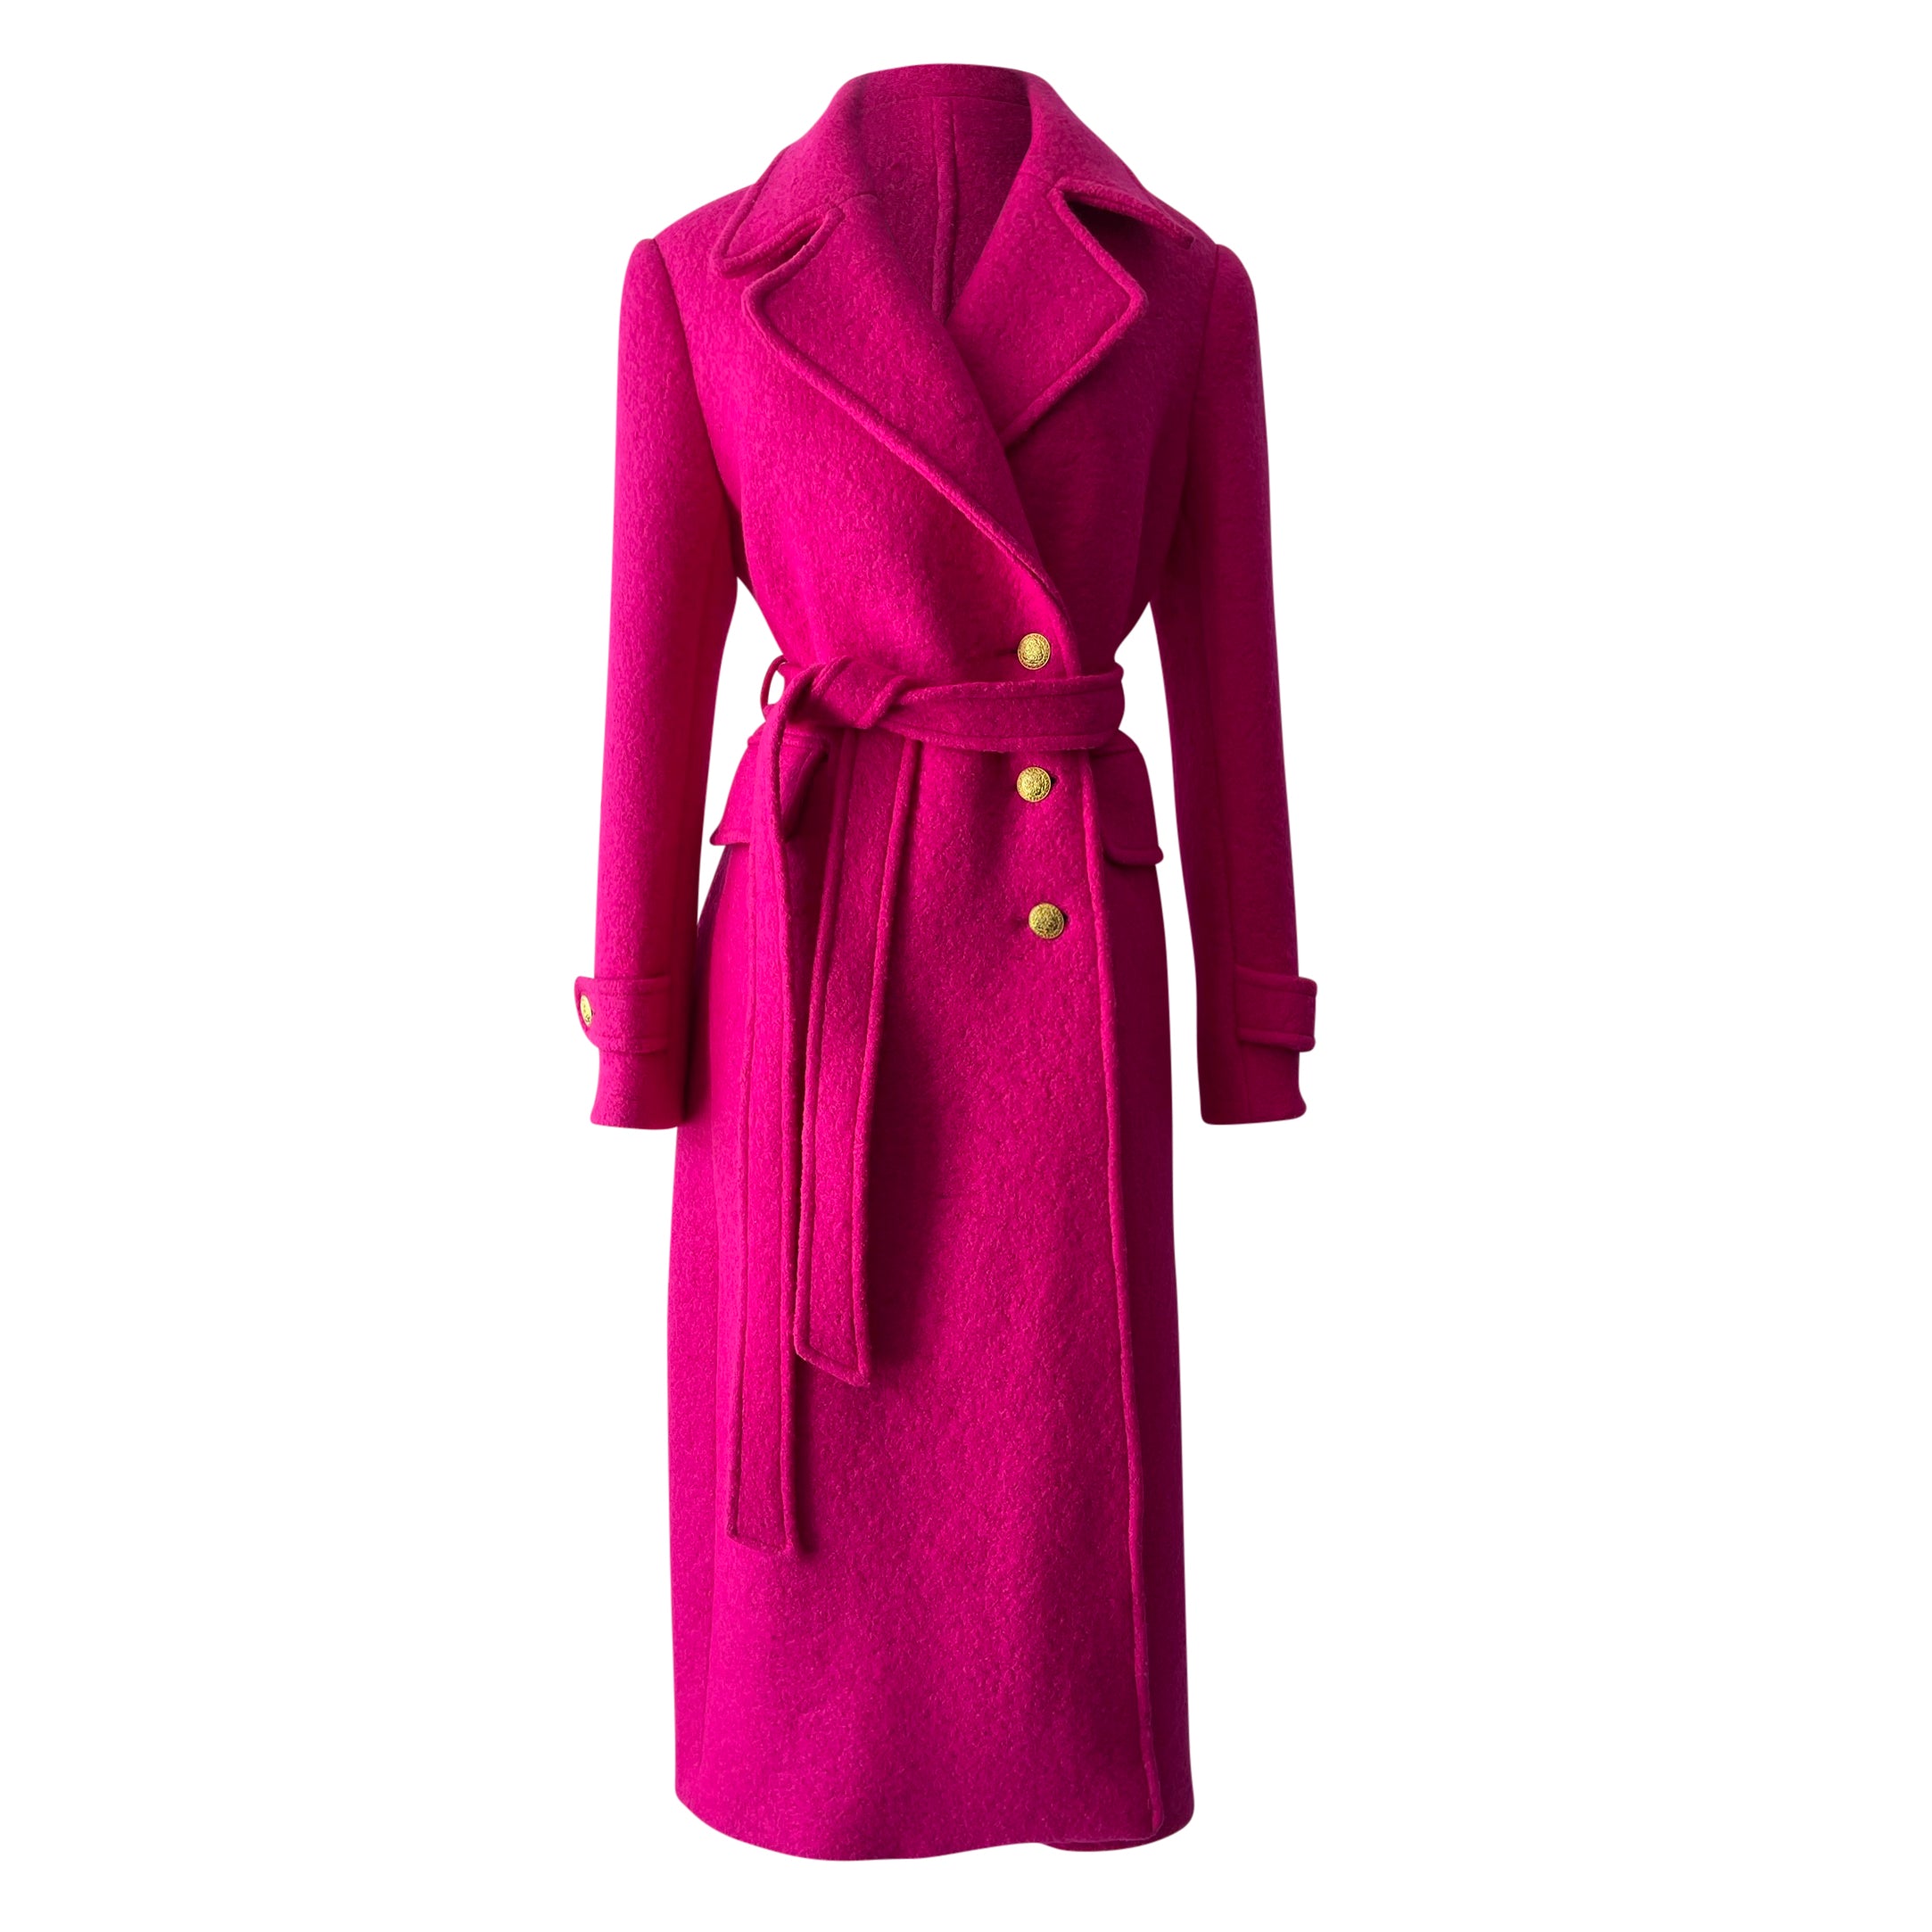 wrapcoat_ellemadewell_hot pink